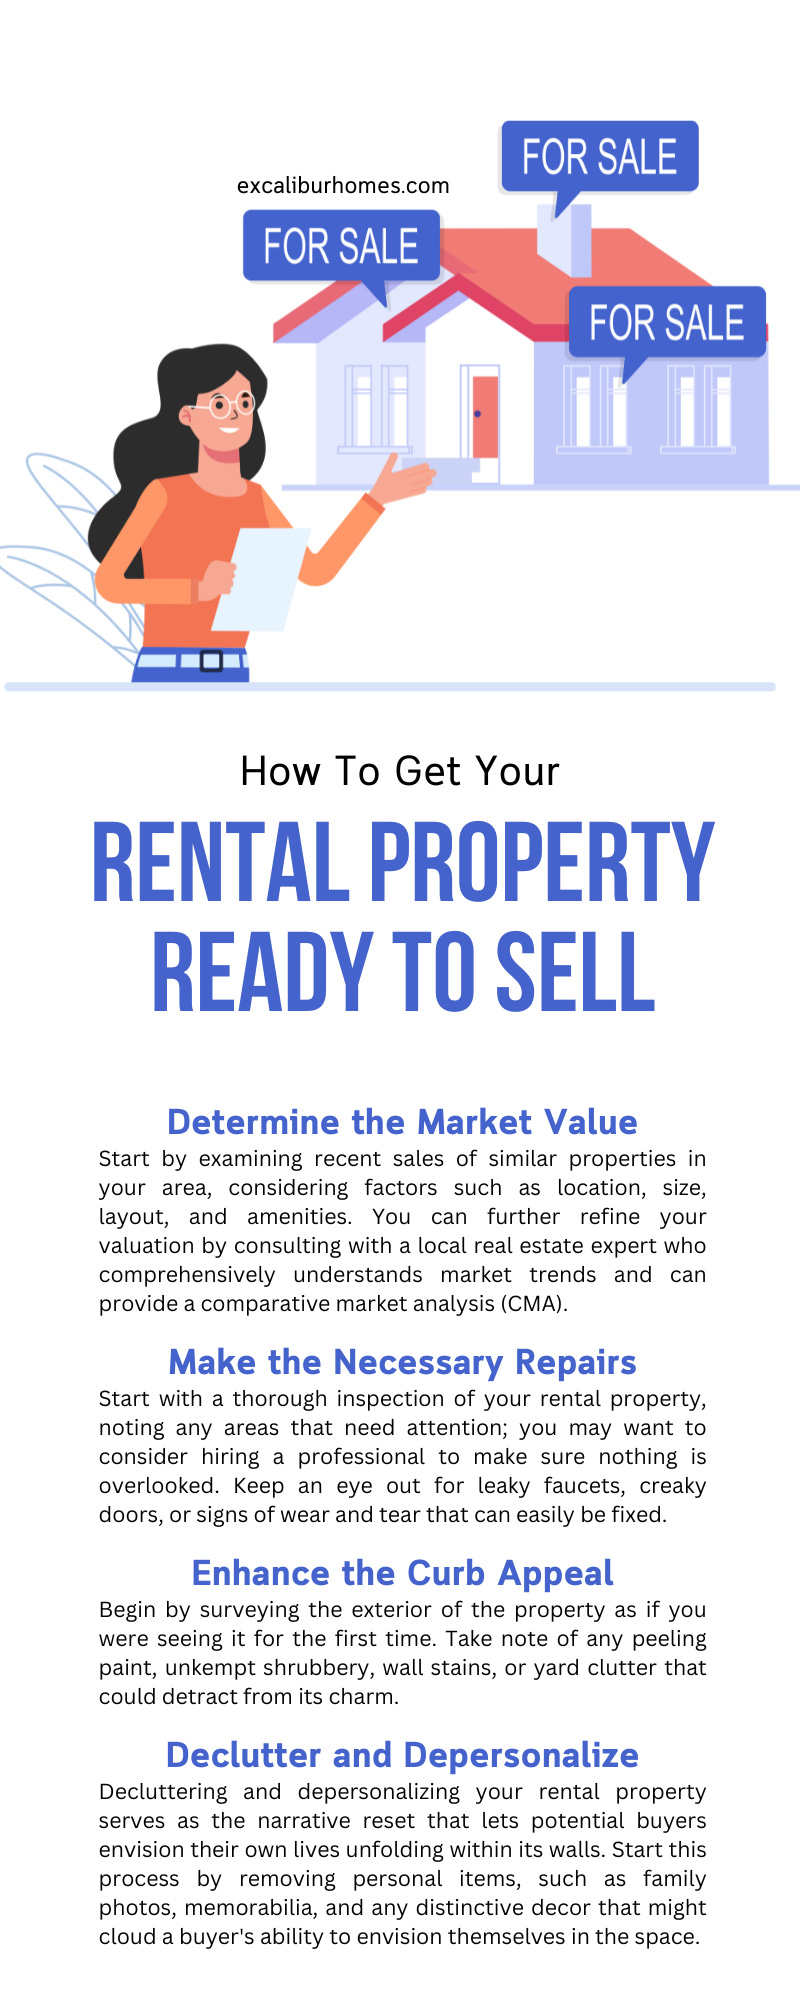 How To Get Your Rental Property Ready To Sell